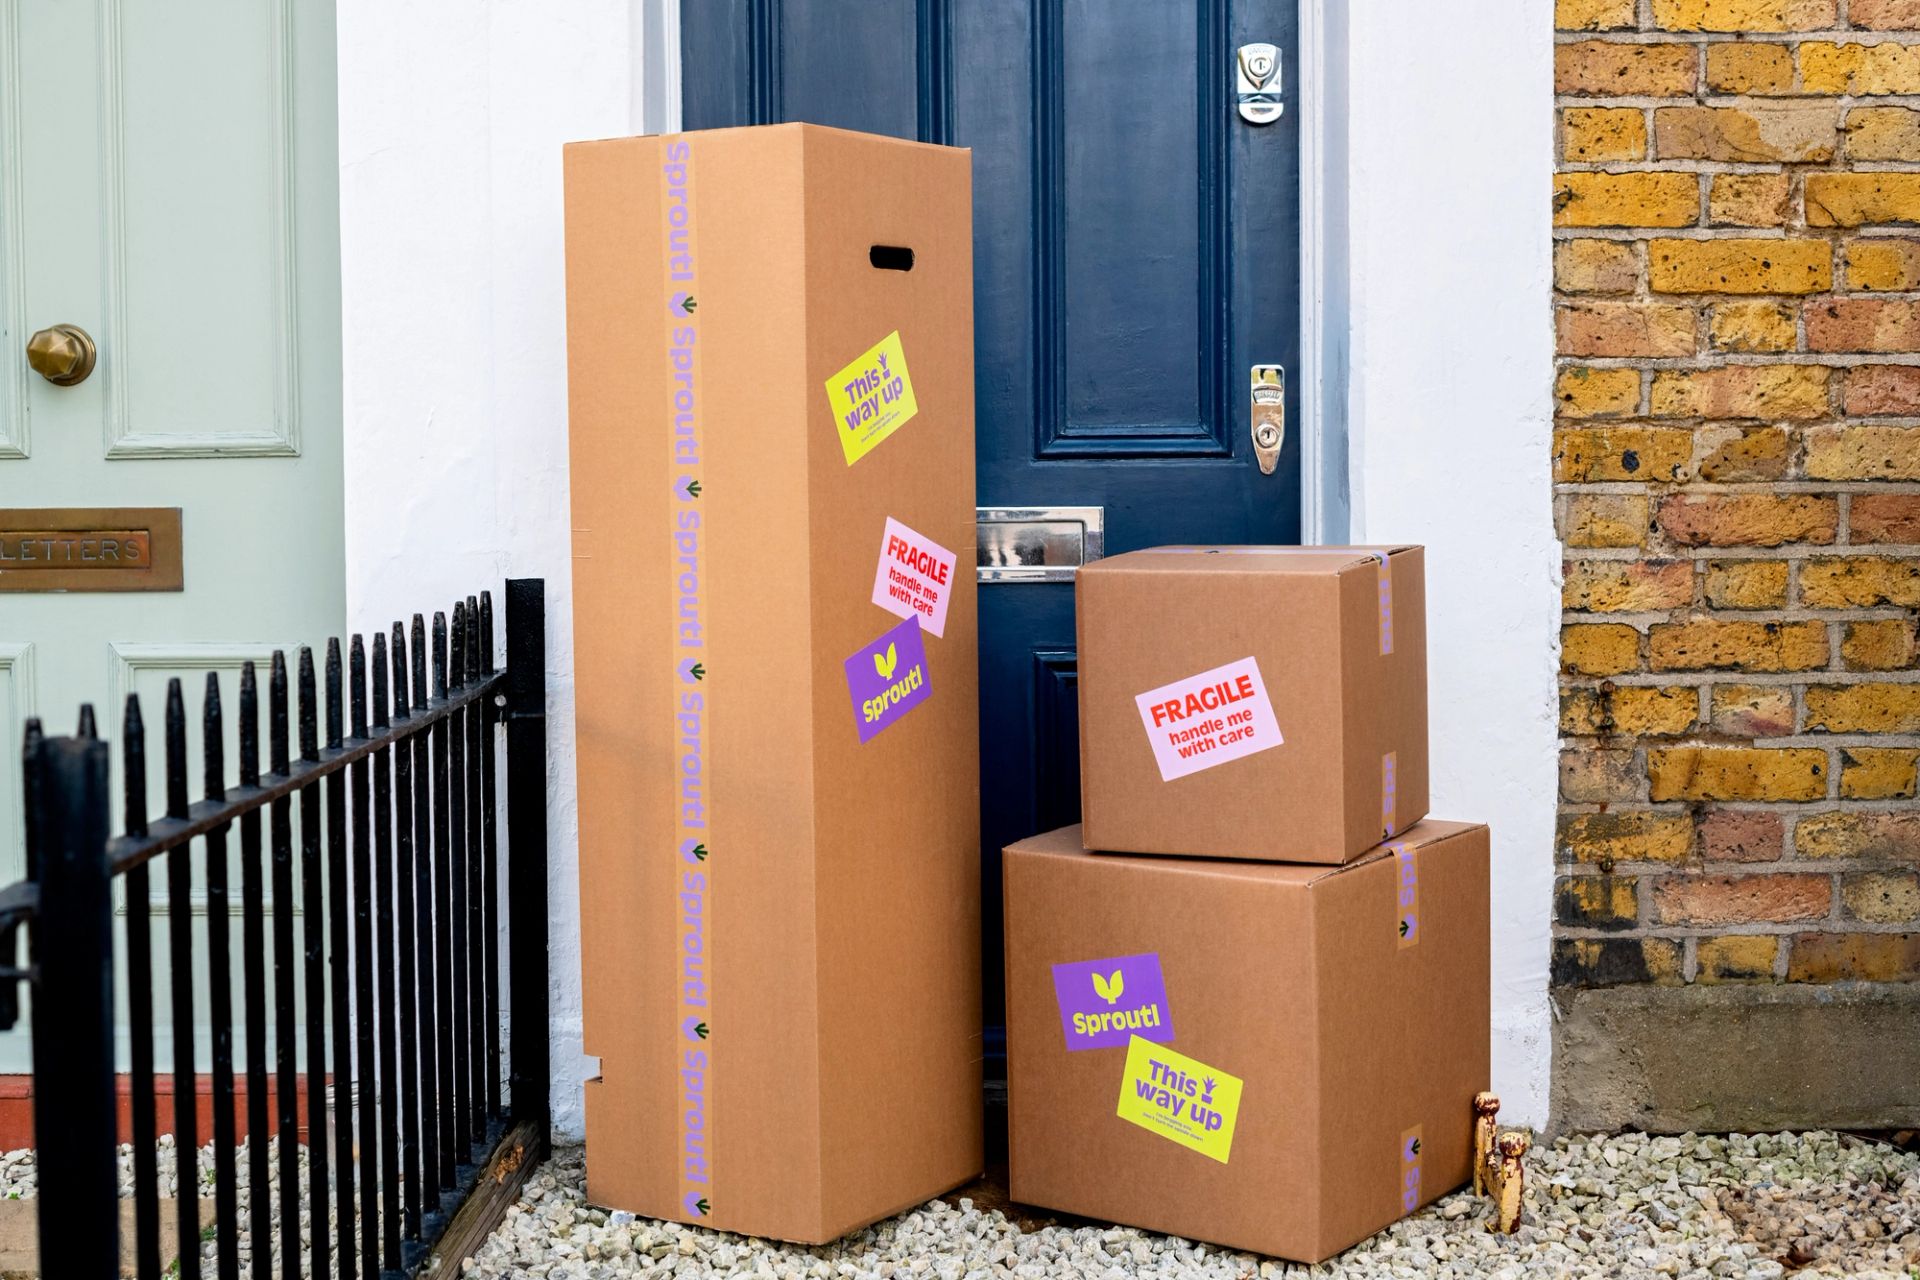 Pile of cardboard boxes outside a blue front door